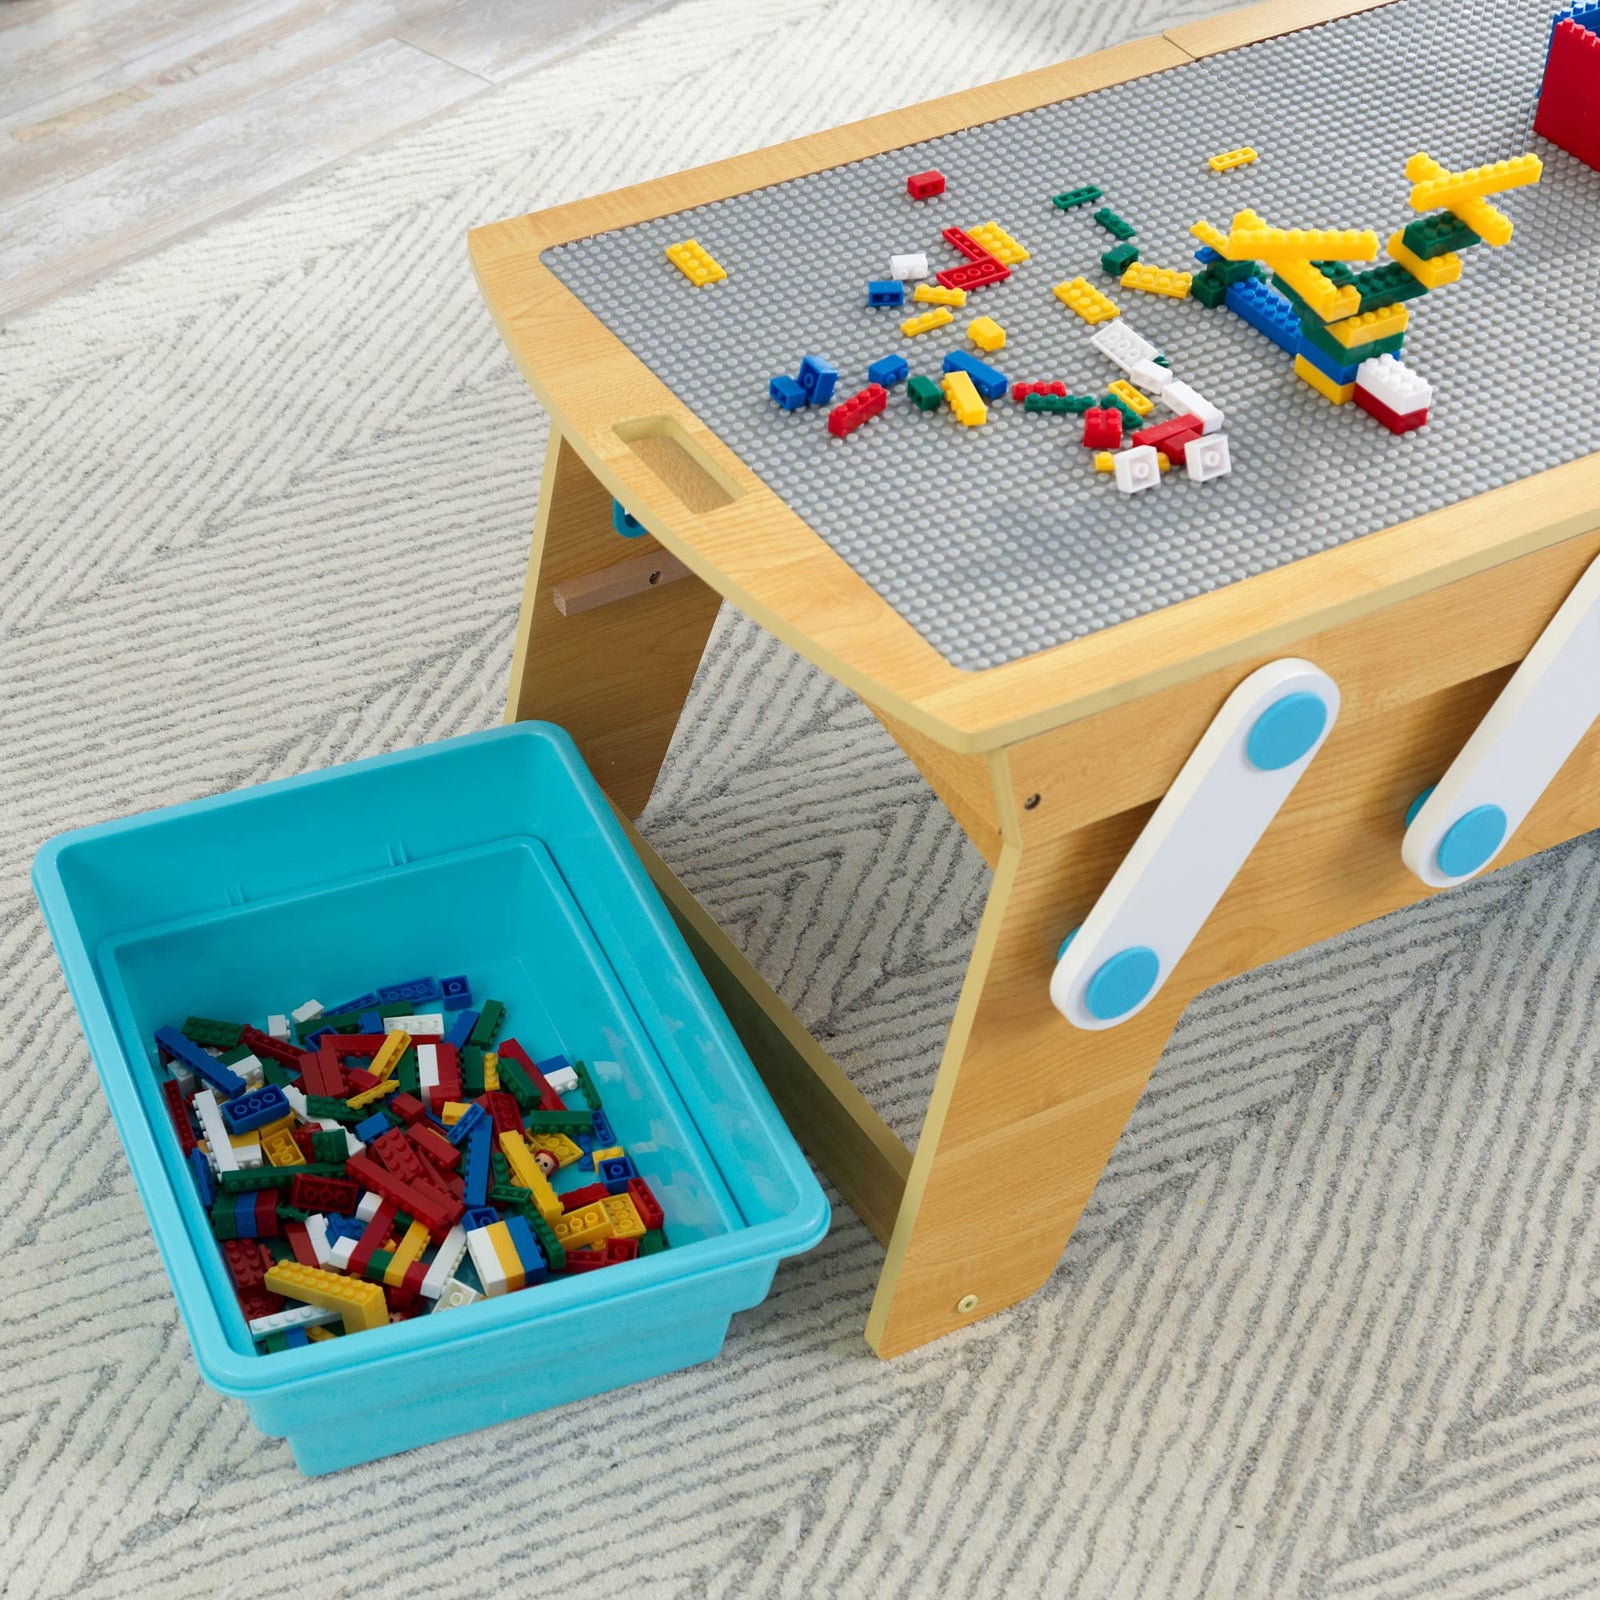 KidKraft Building Bricks Play N Store Wooden Table, Children's Toy Storage with Bins, 200+ Building Blocks Included, Natural, Gift for Ages 3+